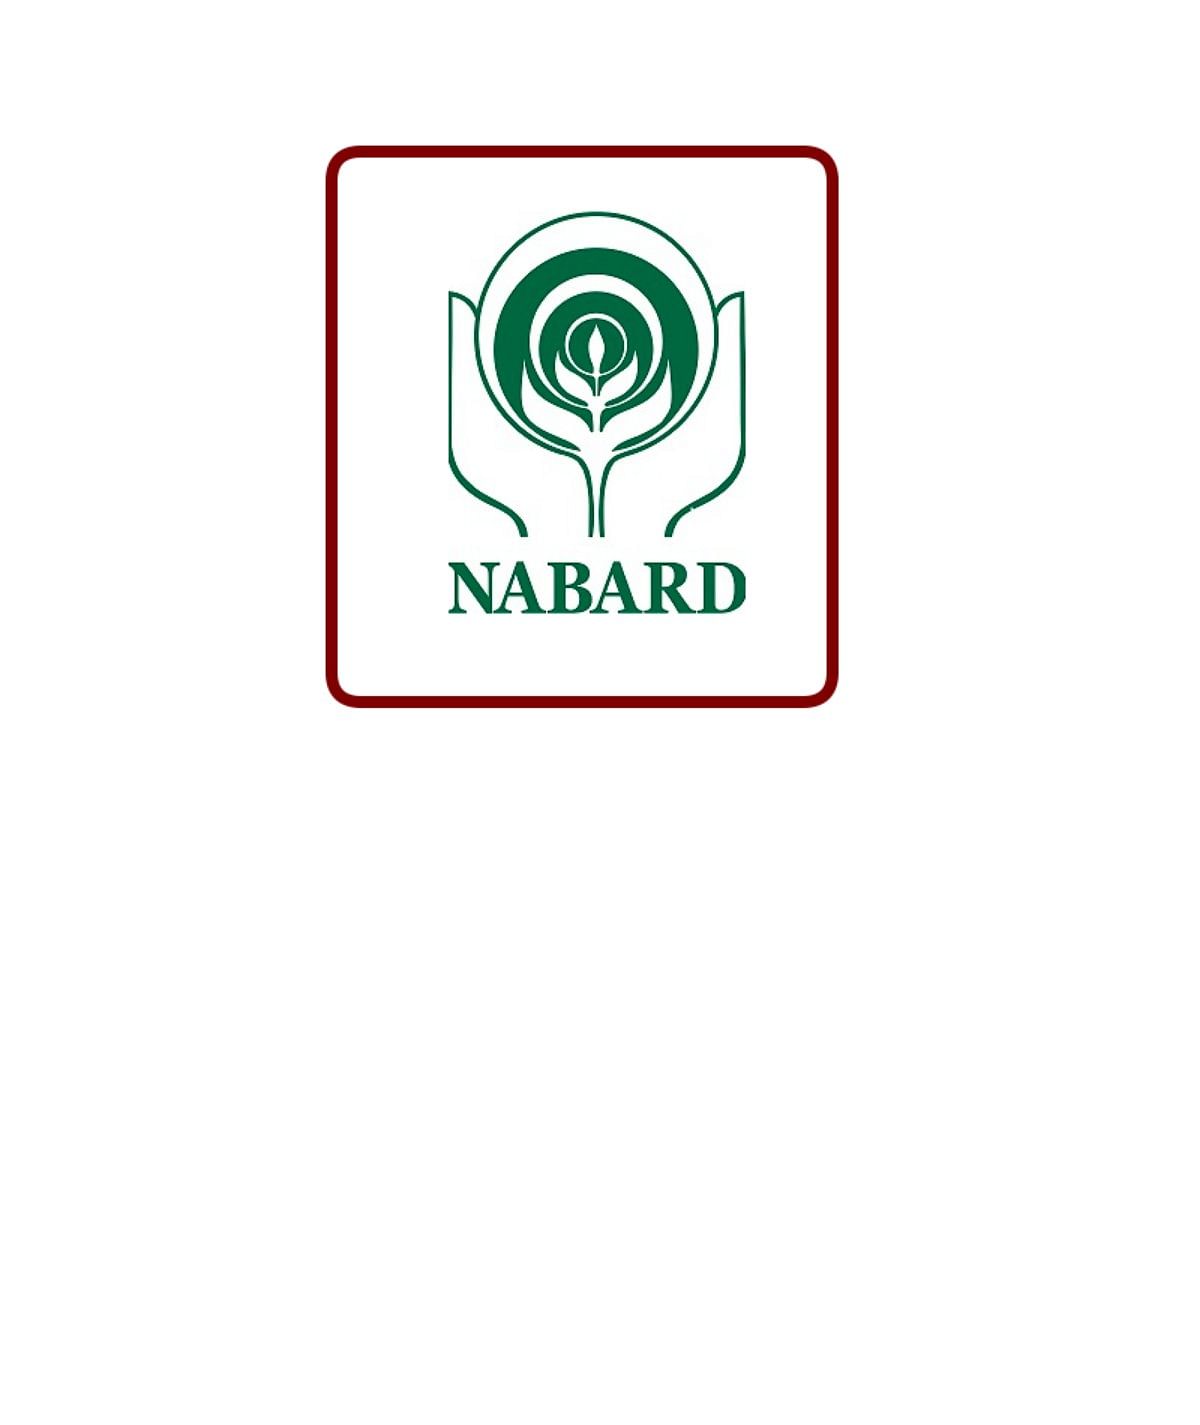 NABARD Grade A Officer Admit Card 2020 Released, Know How to Download 